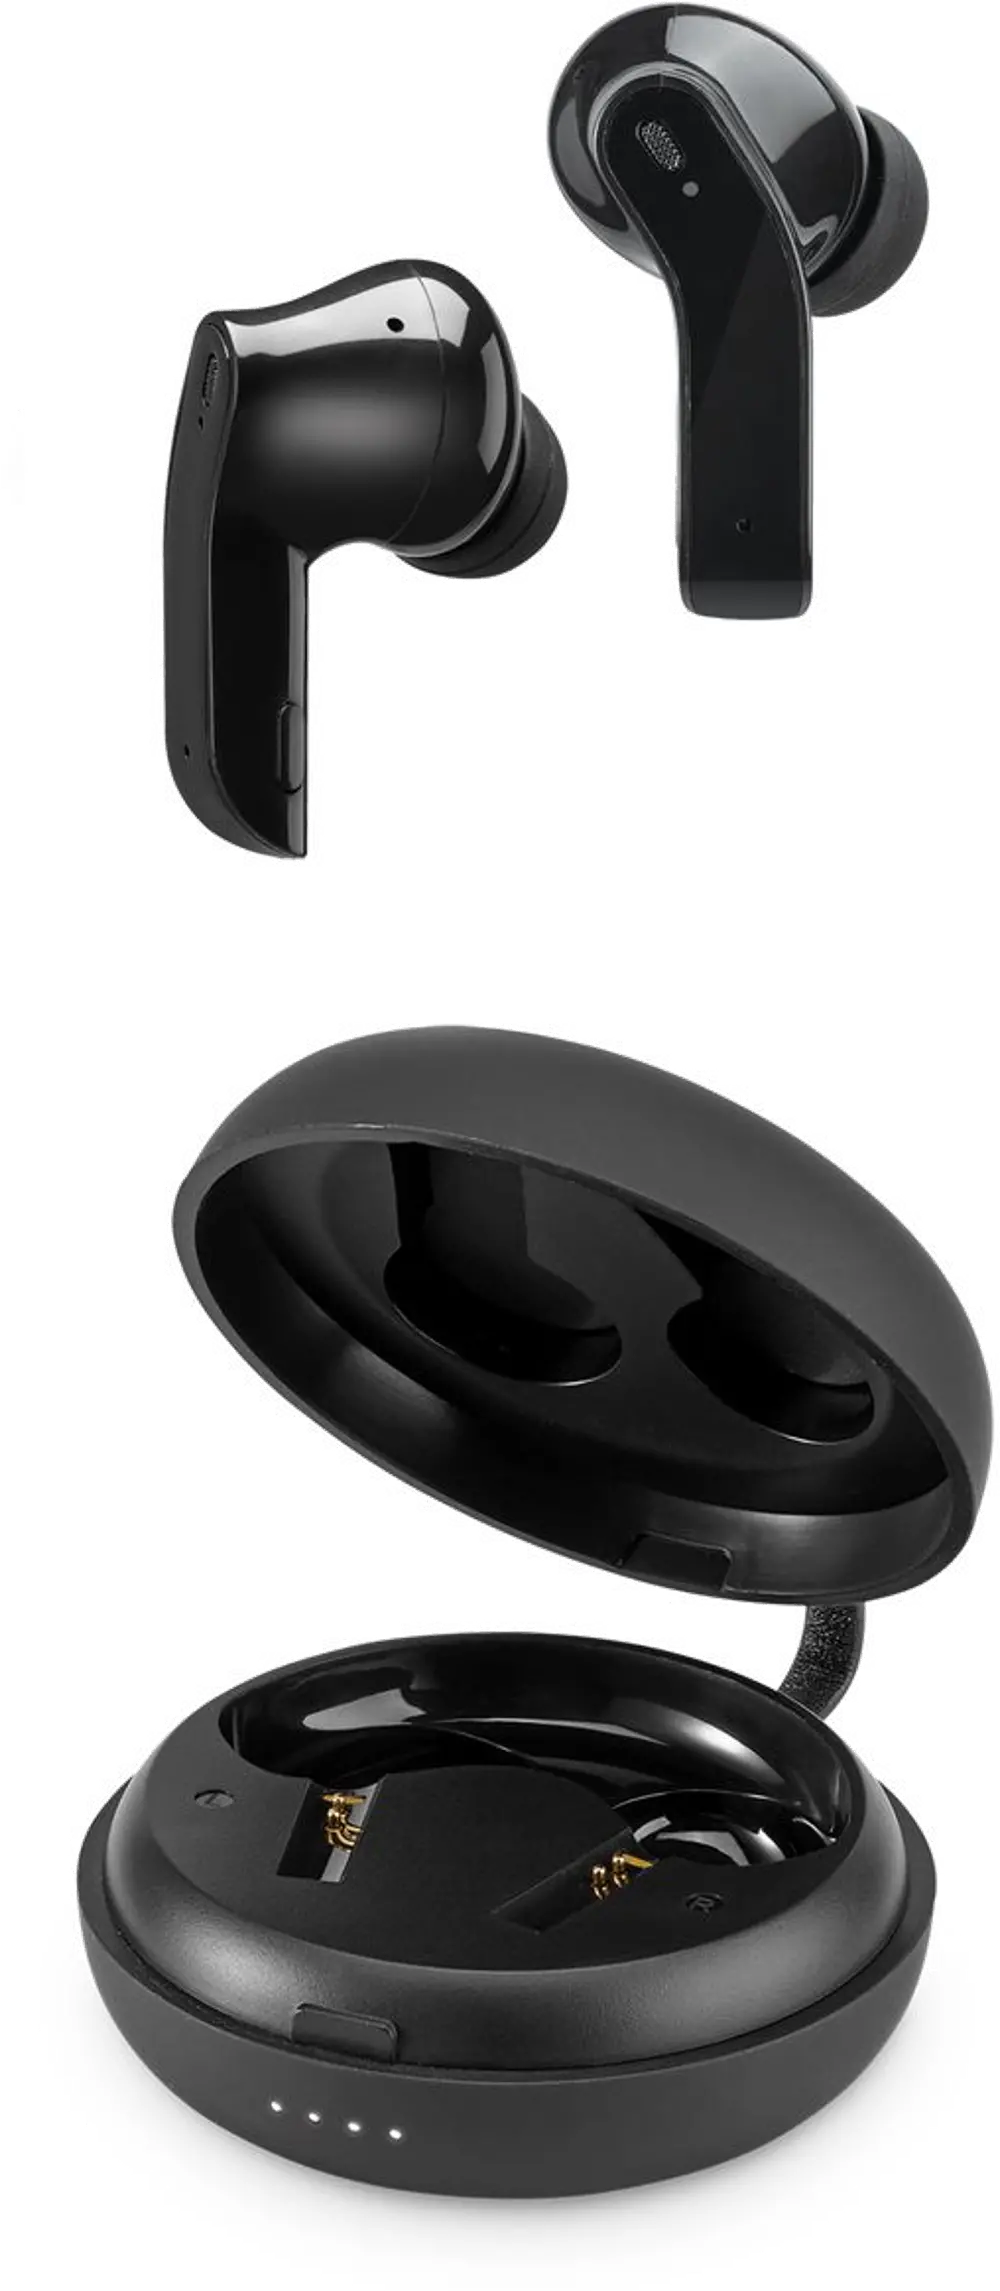 IAEBT600B Truly Wireless Earbuds with Active Noise Canceling-1